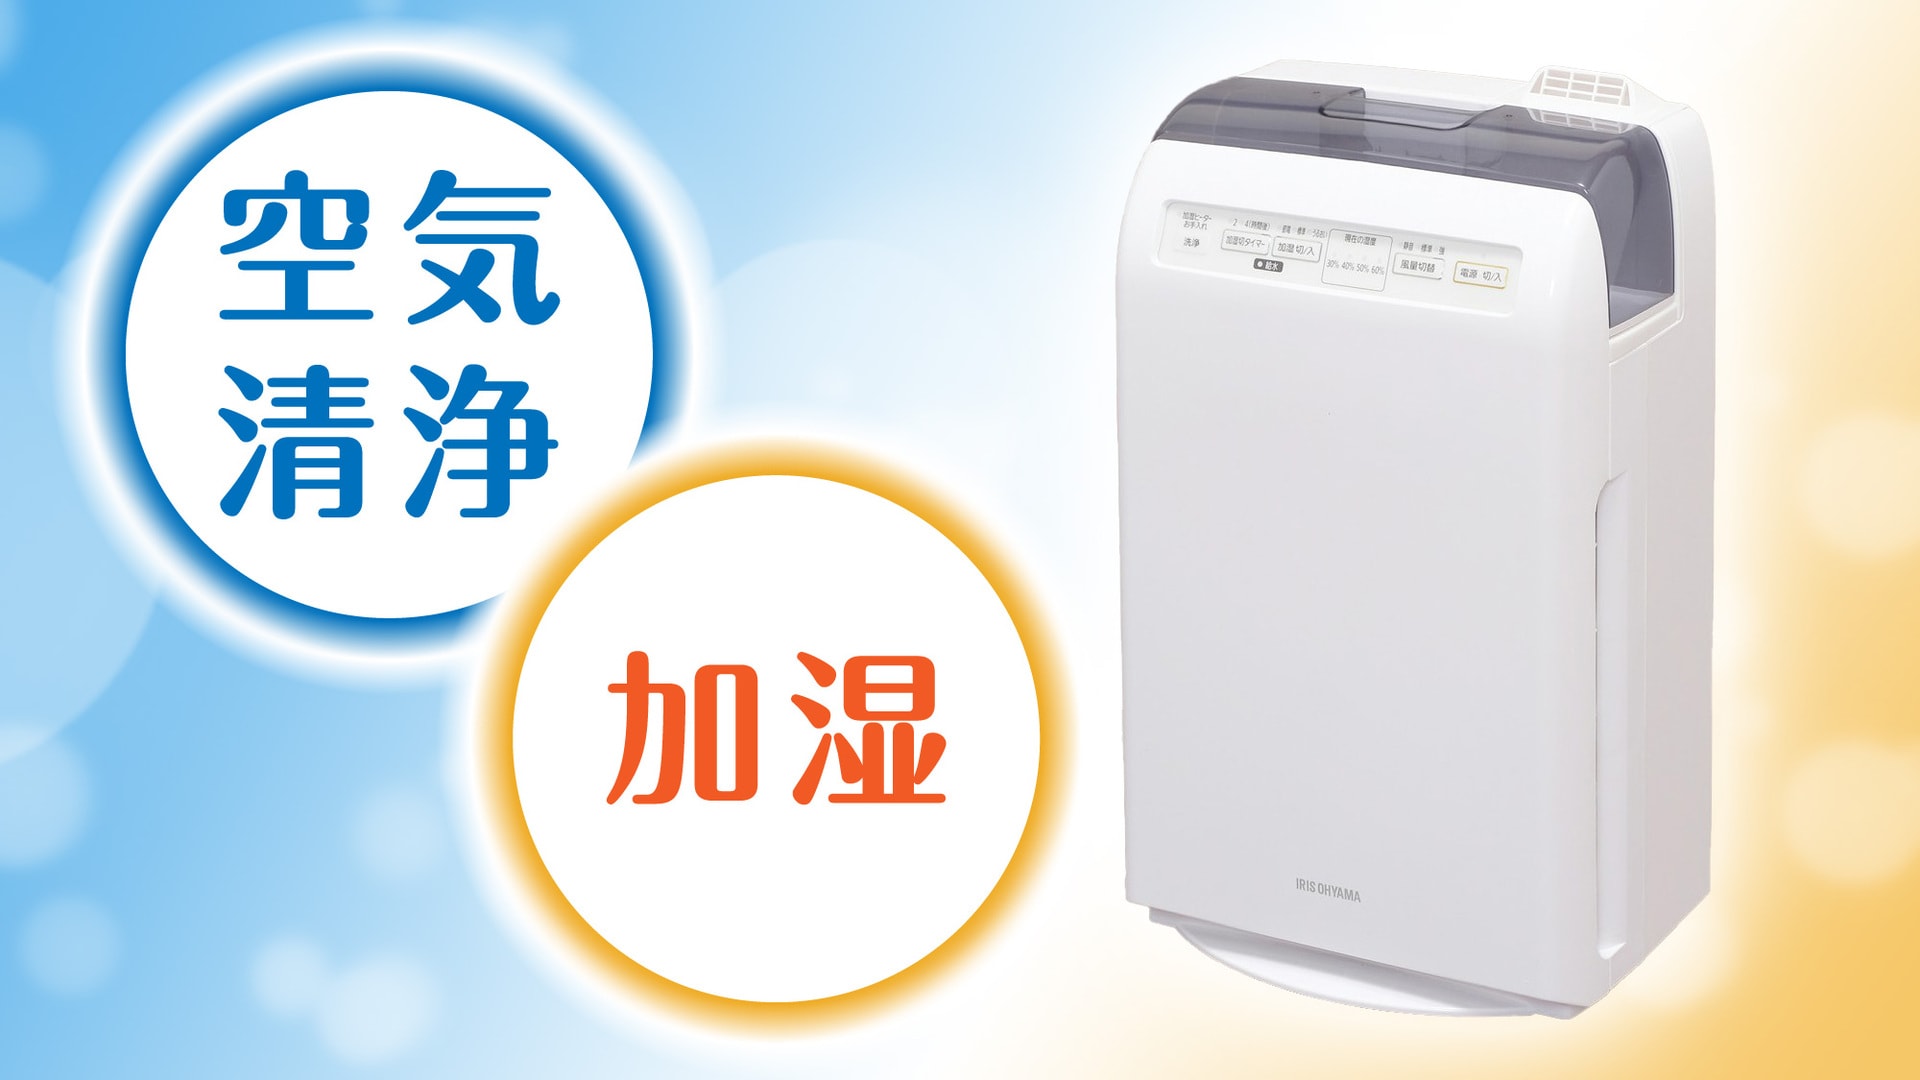 All rooms are equipped with humidified air purifiers ♪